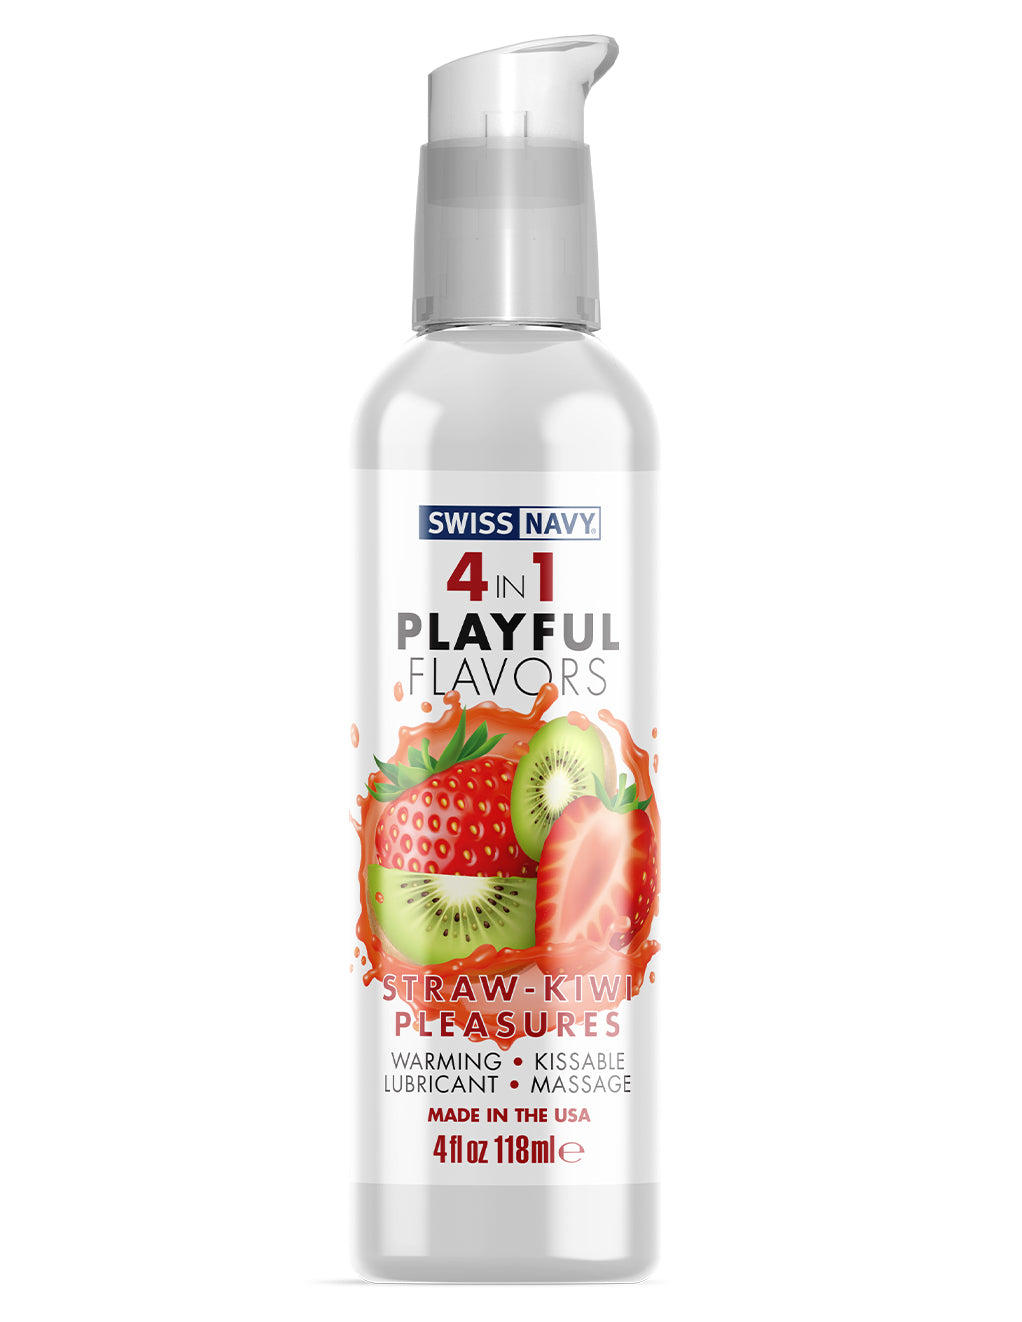 Swiss Navy 4-in-1 Flavored Lube- Straw-Kiwi Pleasures- Front